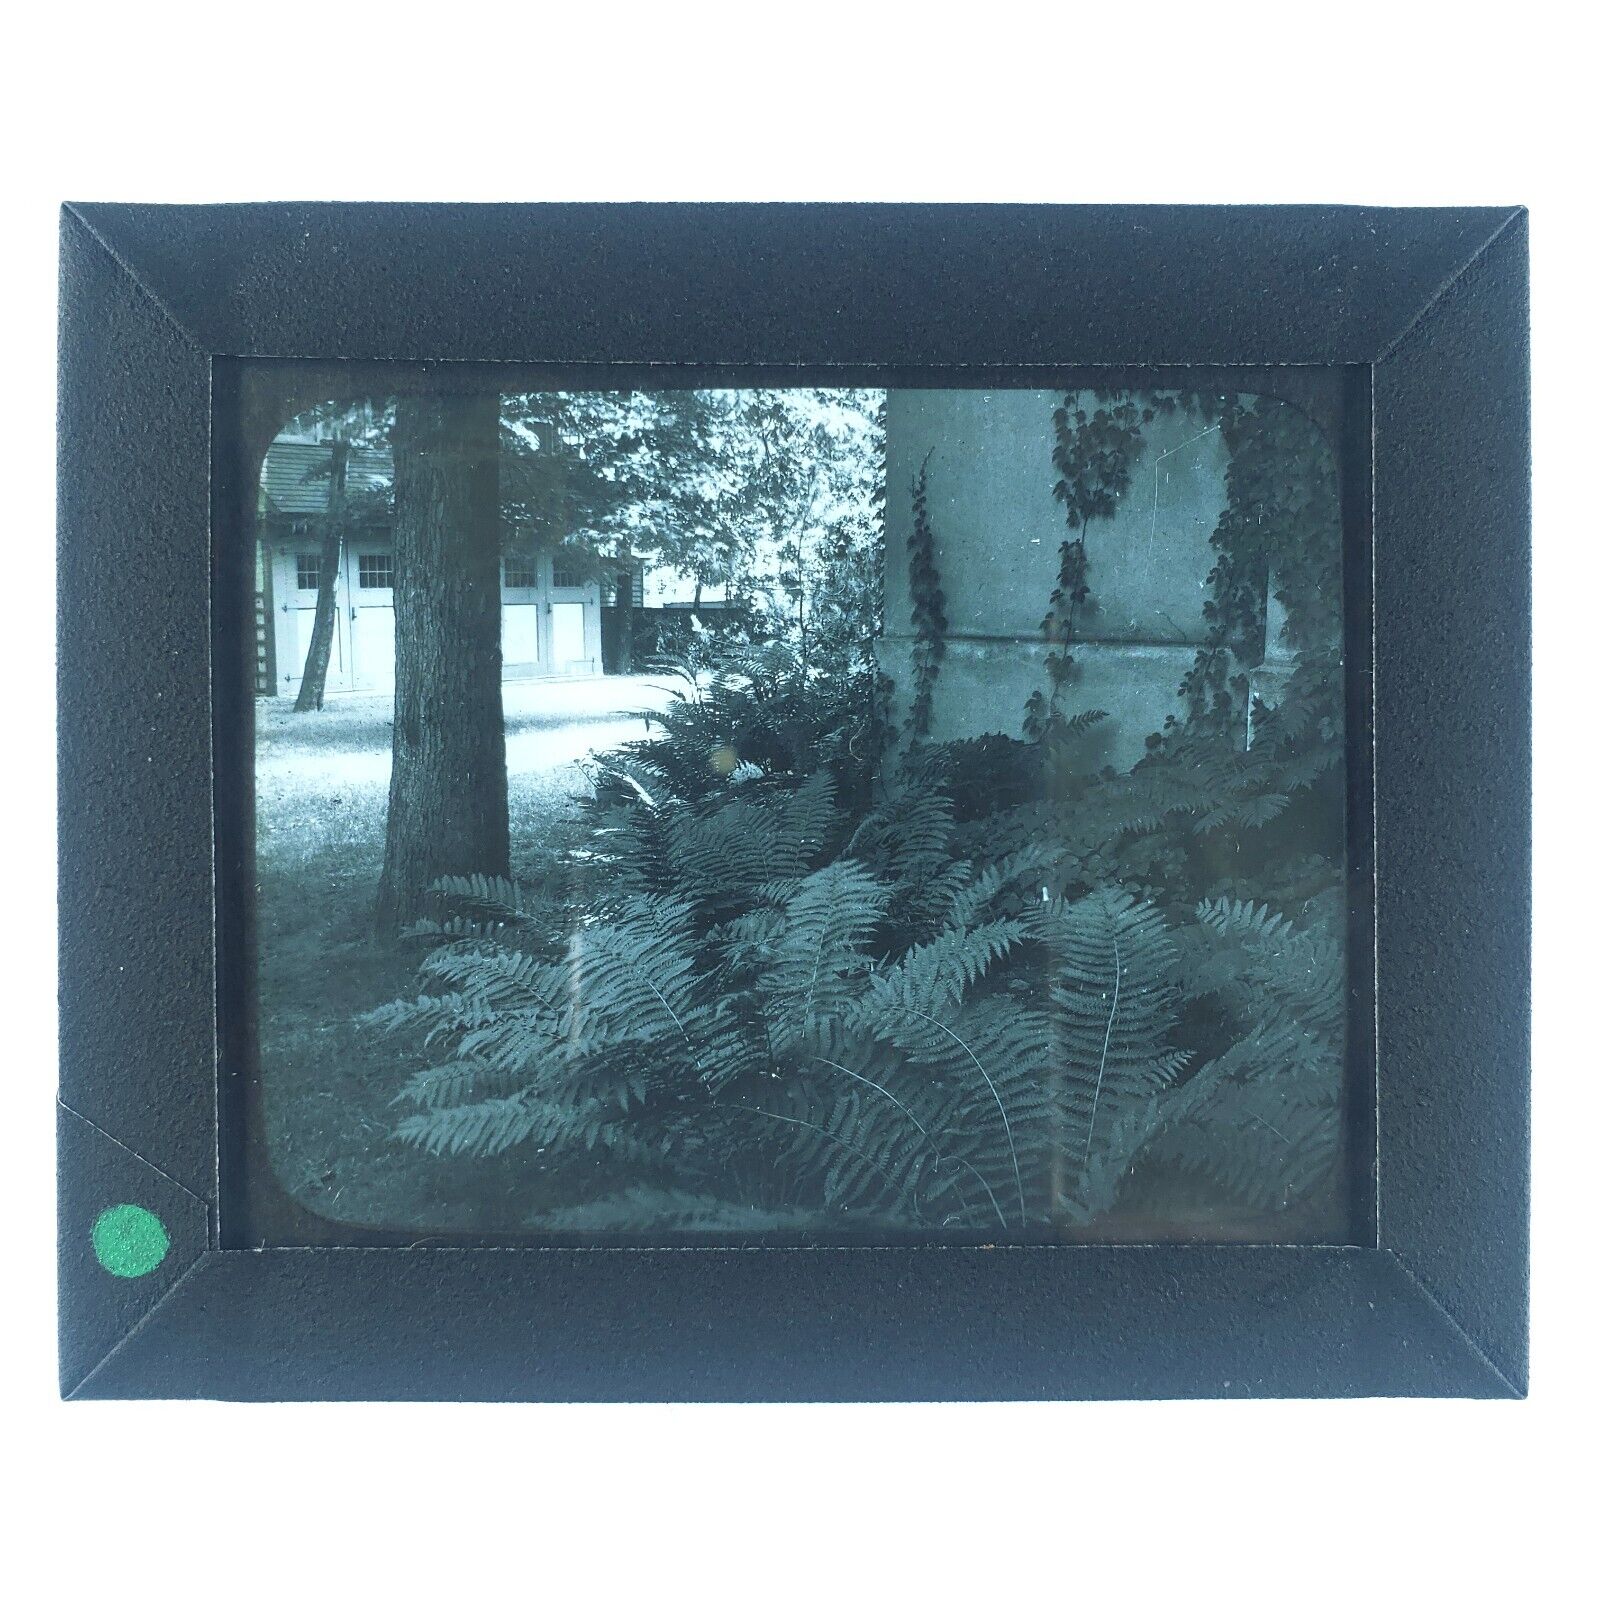 Unknown Mystery Ferns Glass Slide 1920s Magic Lantern Tree House Building A4020